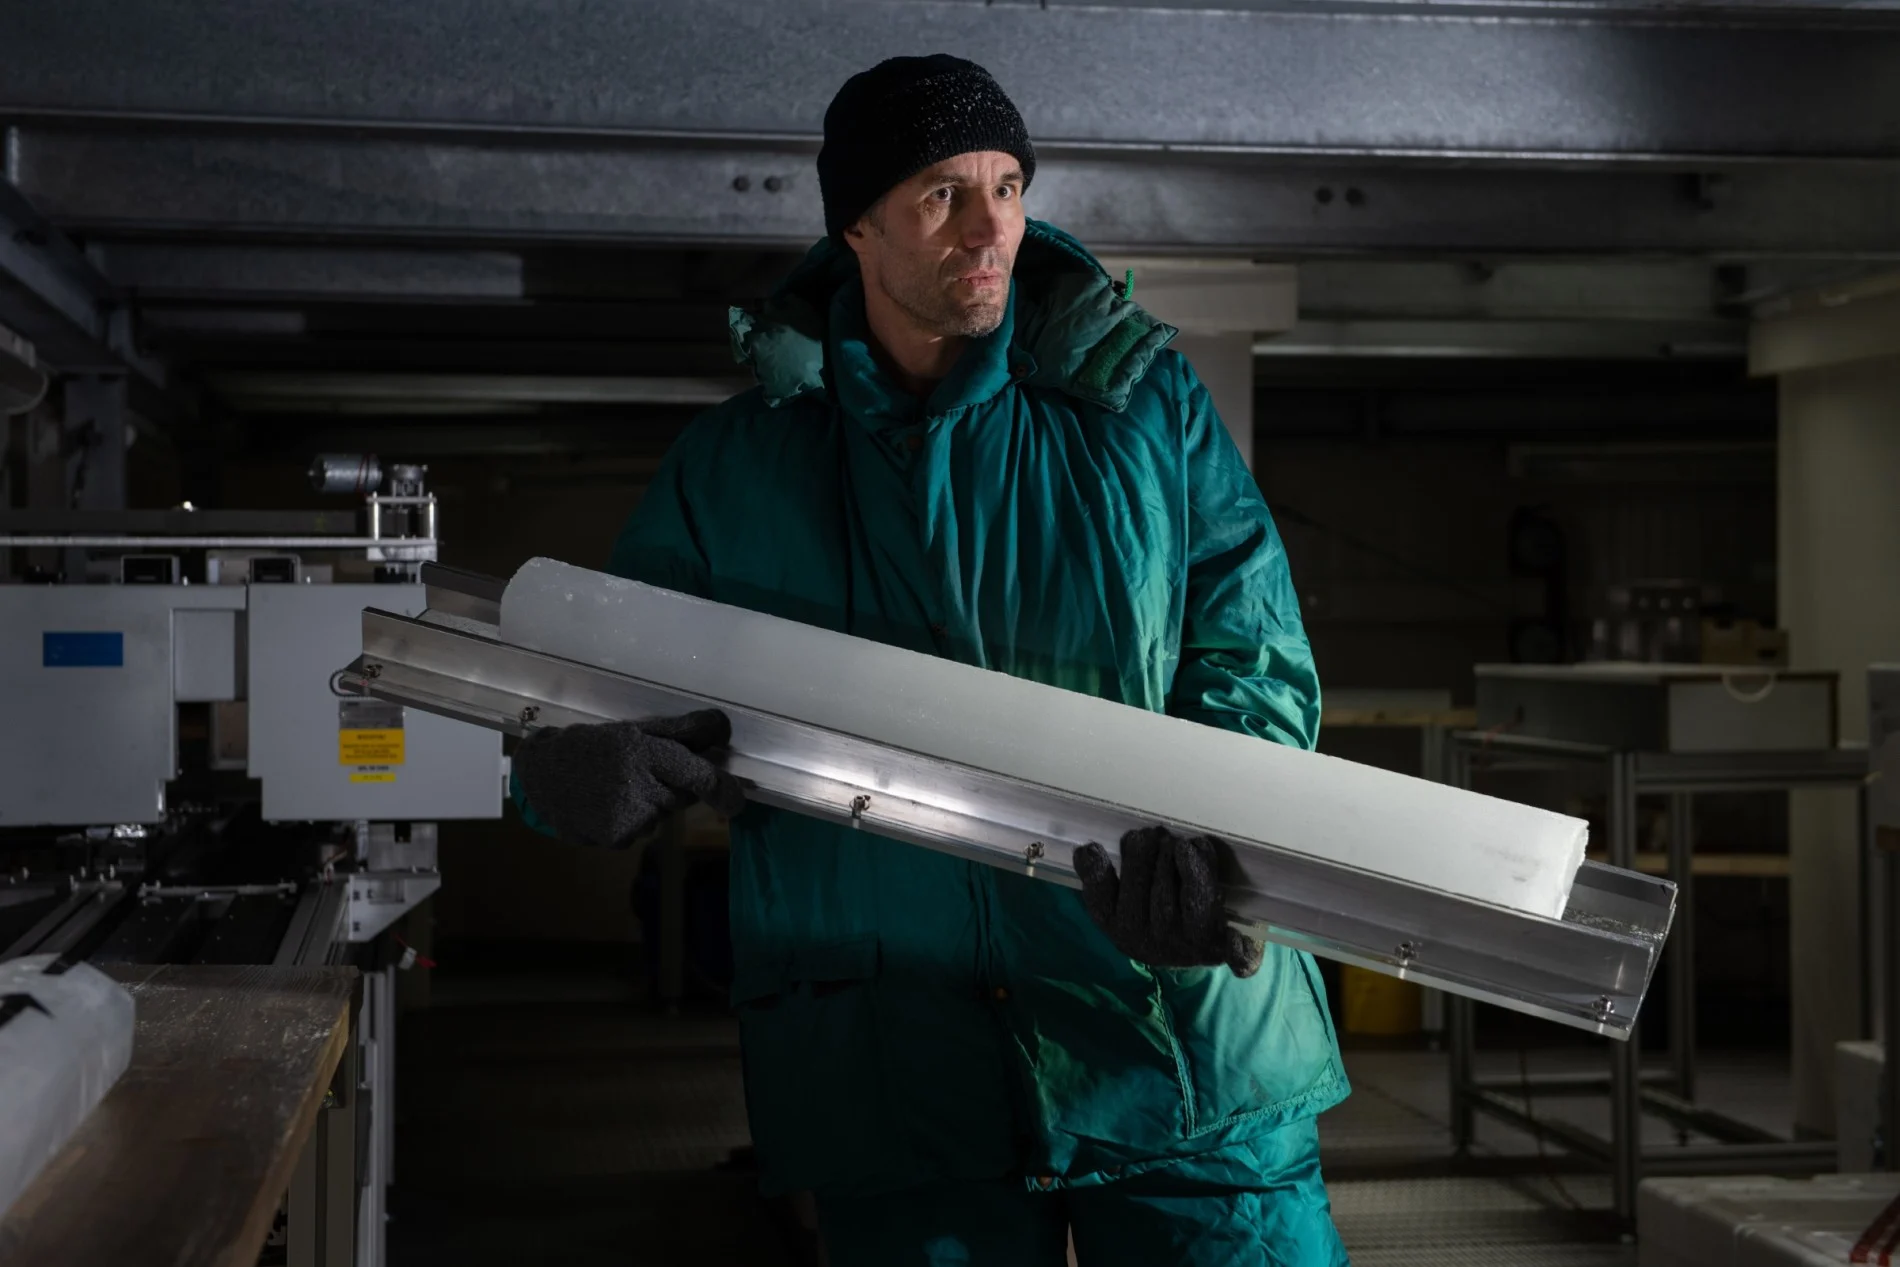 Glaciologist Johannes Freitag in the AWI ice laboratory with ice core at the saw stand. (Esther Horvath)